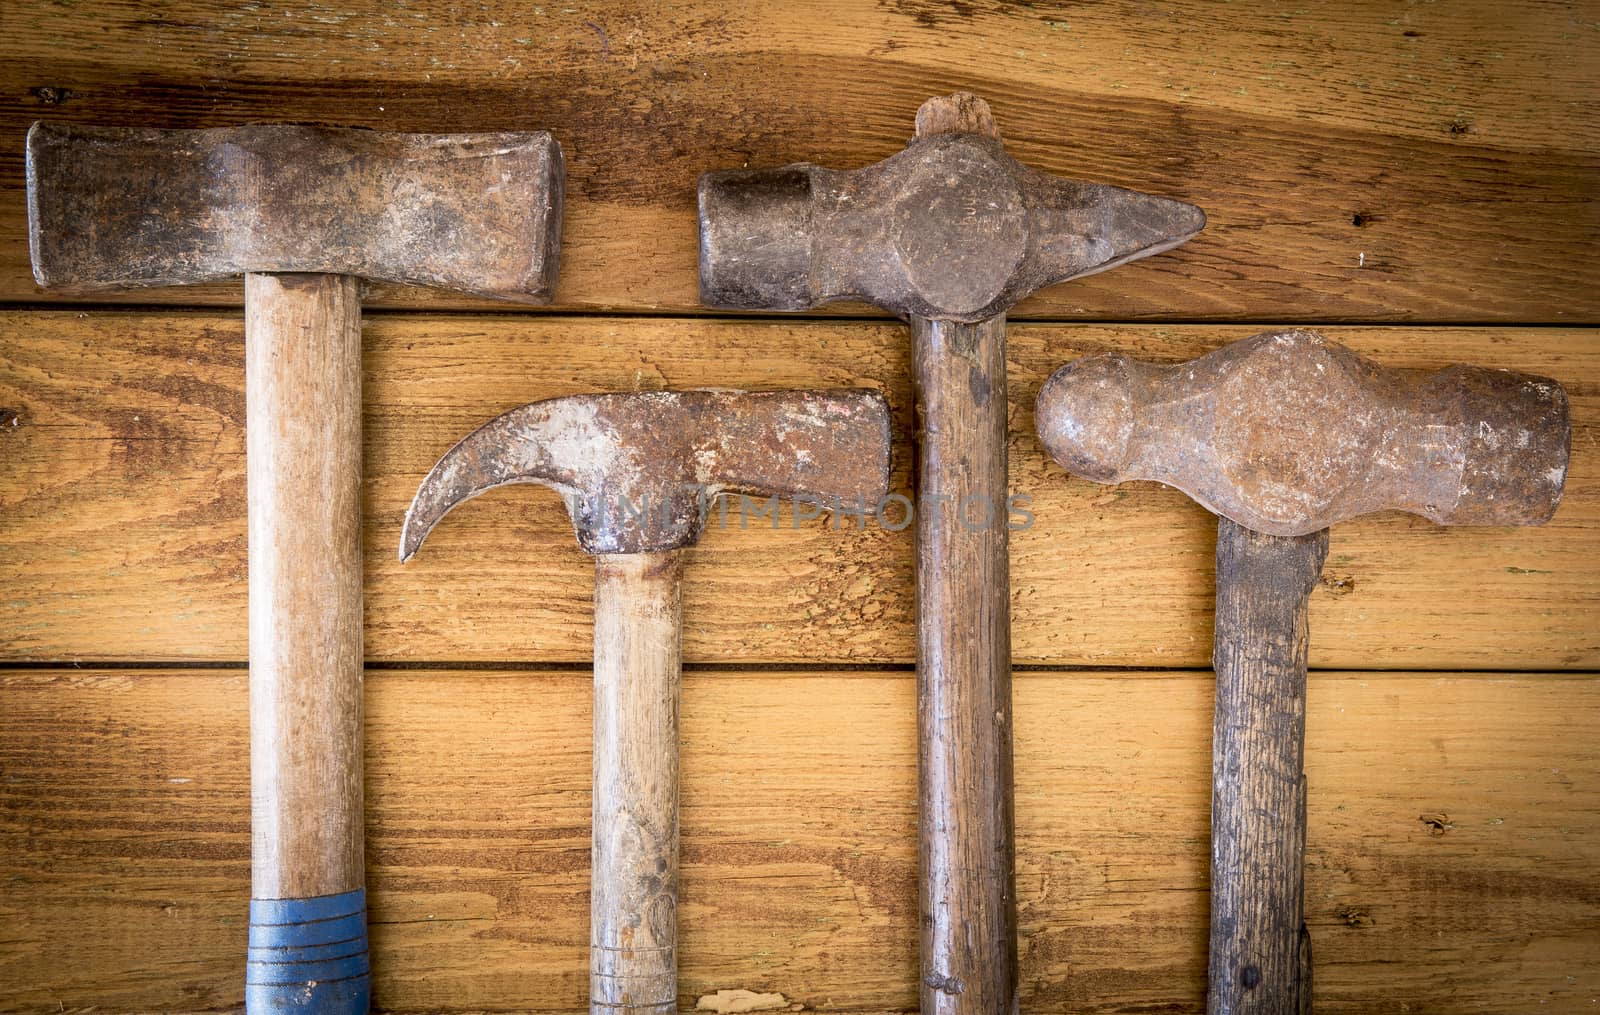 Group of  old oxide vintage tools. Hammers